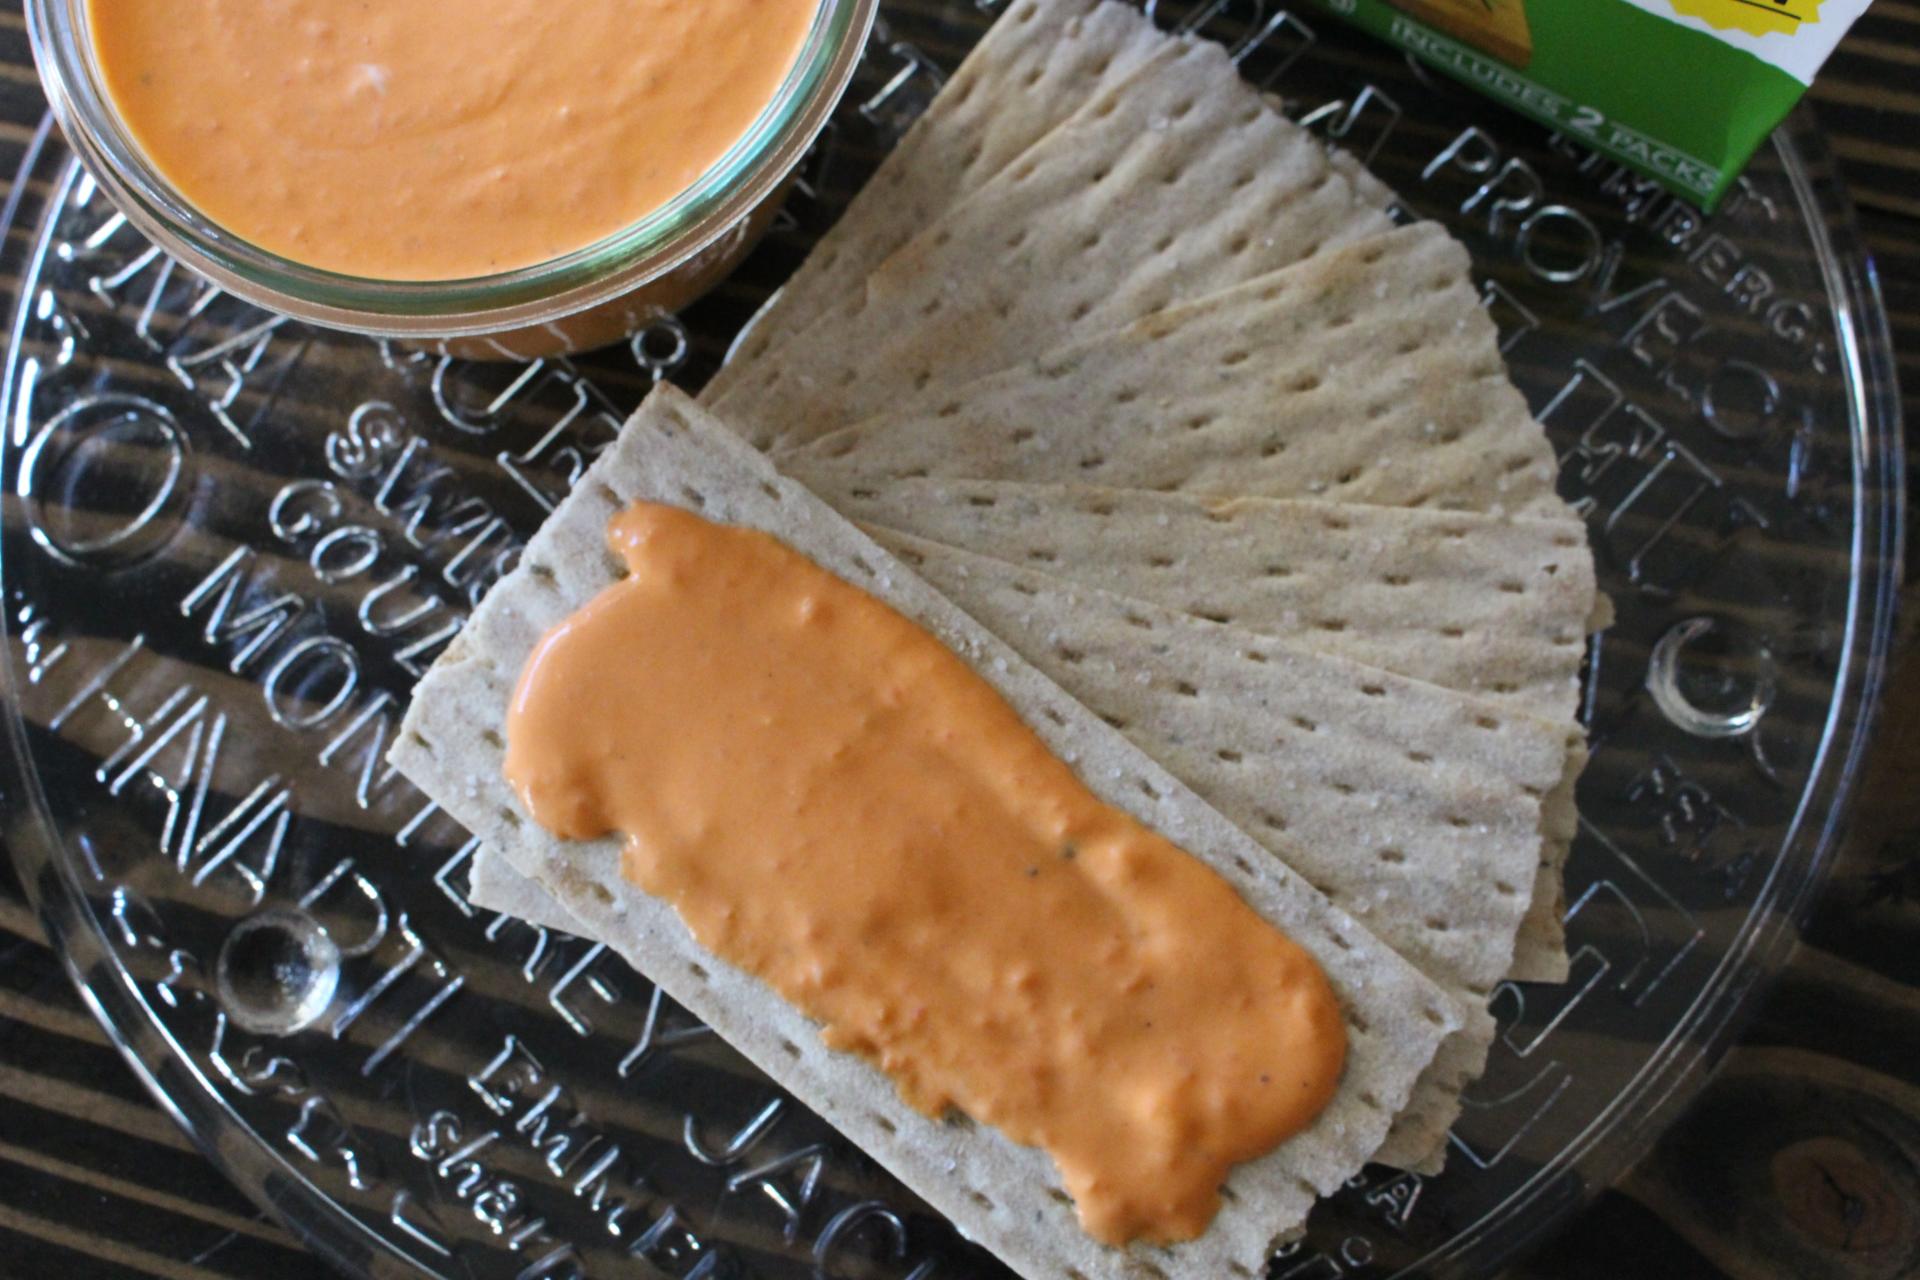 SAUCES AND SPREADS: Roasted Red Pepper Goat Cheese Spread with Wasa